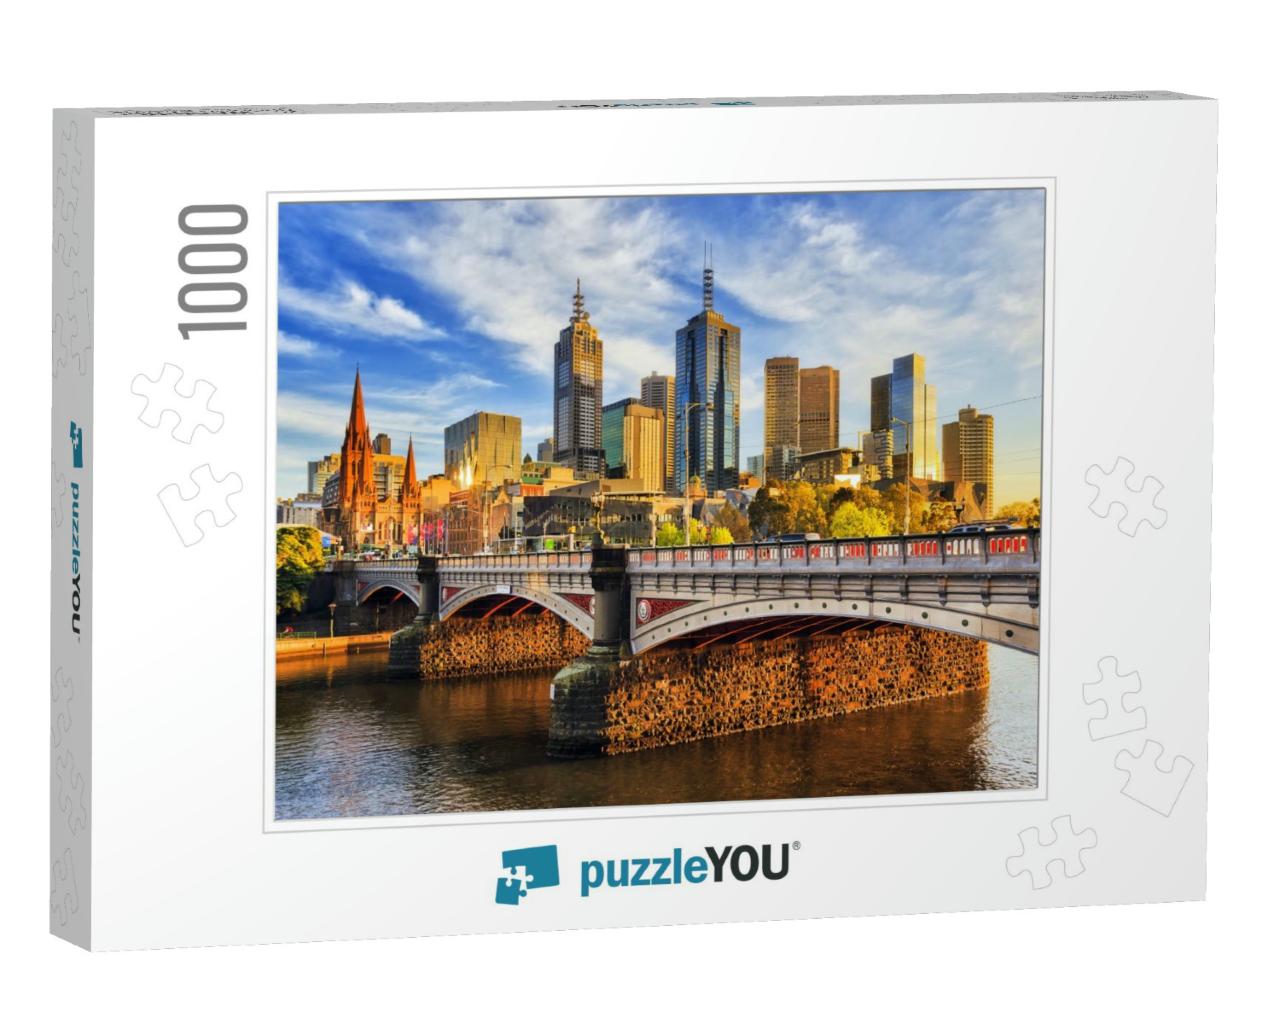 Warm Morning Light on High-Rise Towers in Melbourne Cbd A... Jigsaw Puzzle with 1000 pieces